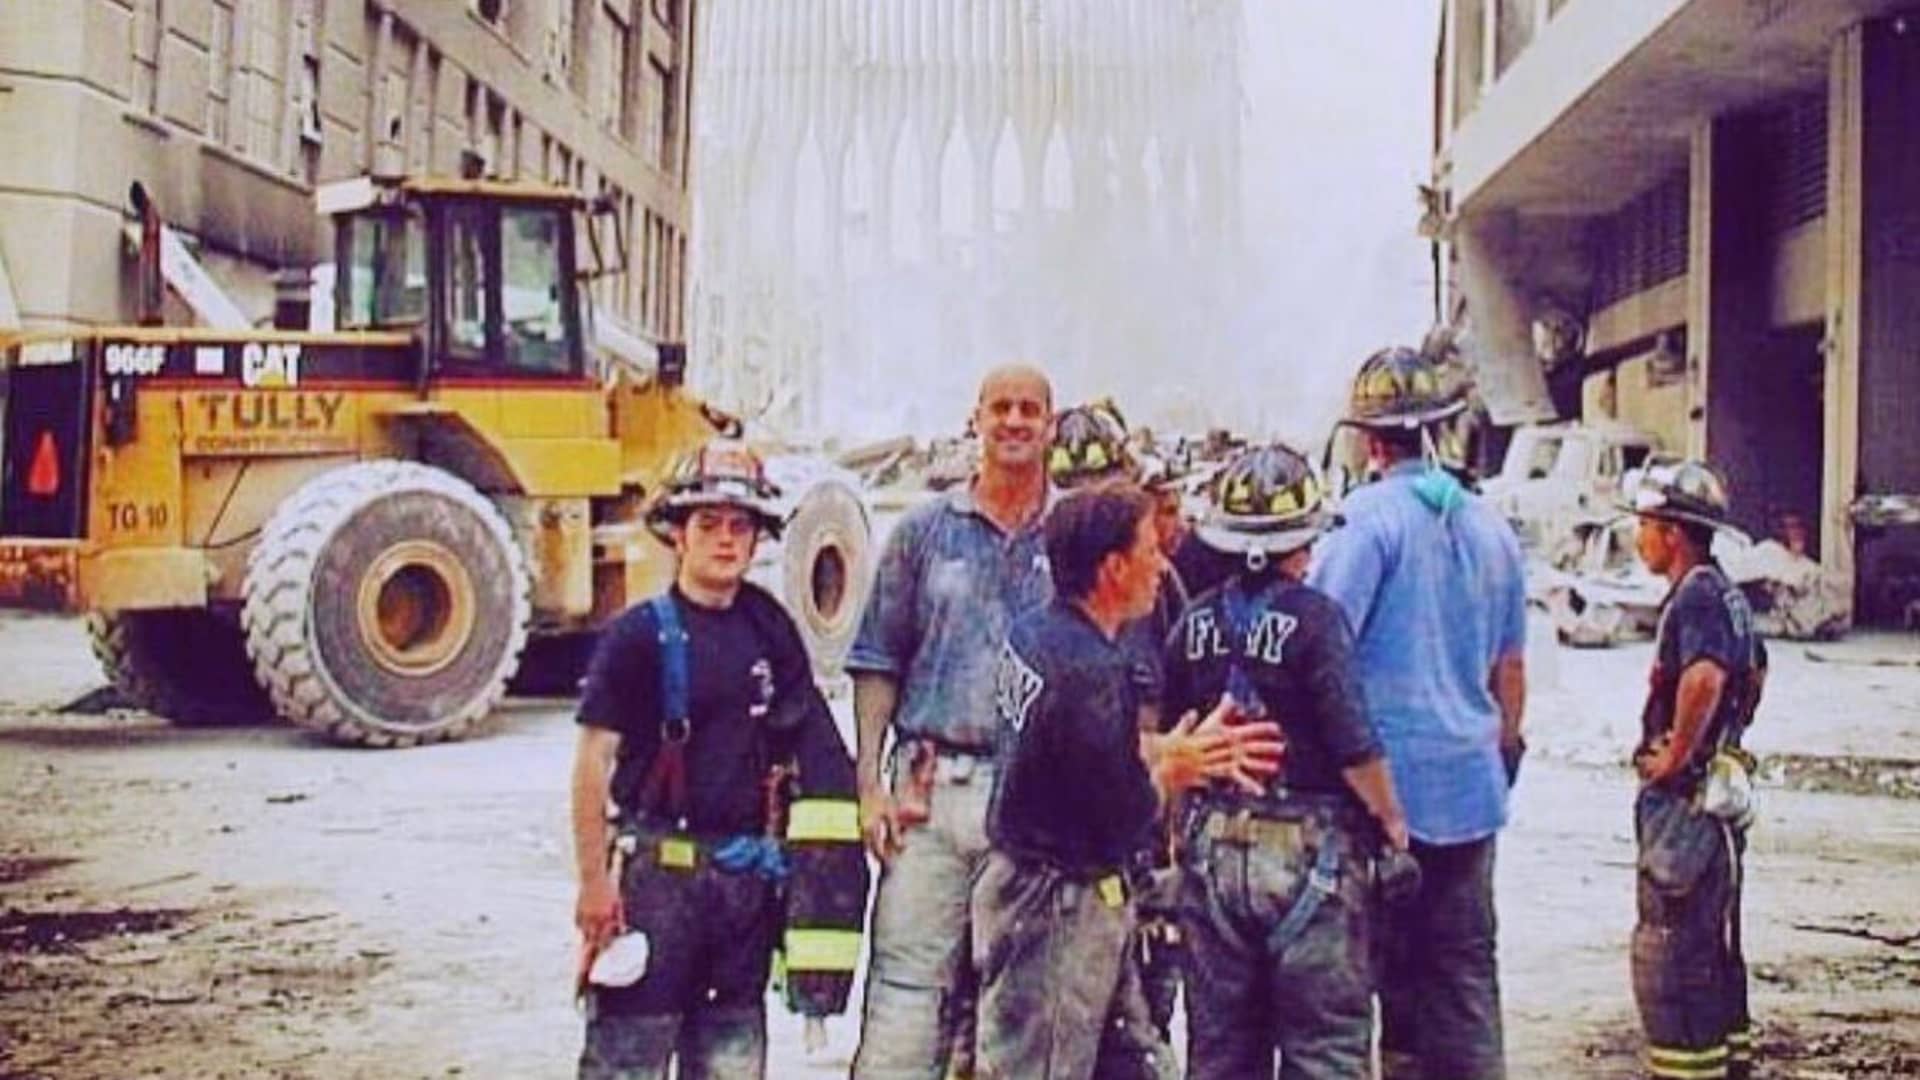 Keith Young (Second from Left) with his fellow firefighters clearing the wreckage at Ground Zero in lower Manhattan in 2001.